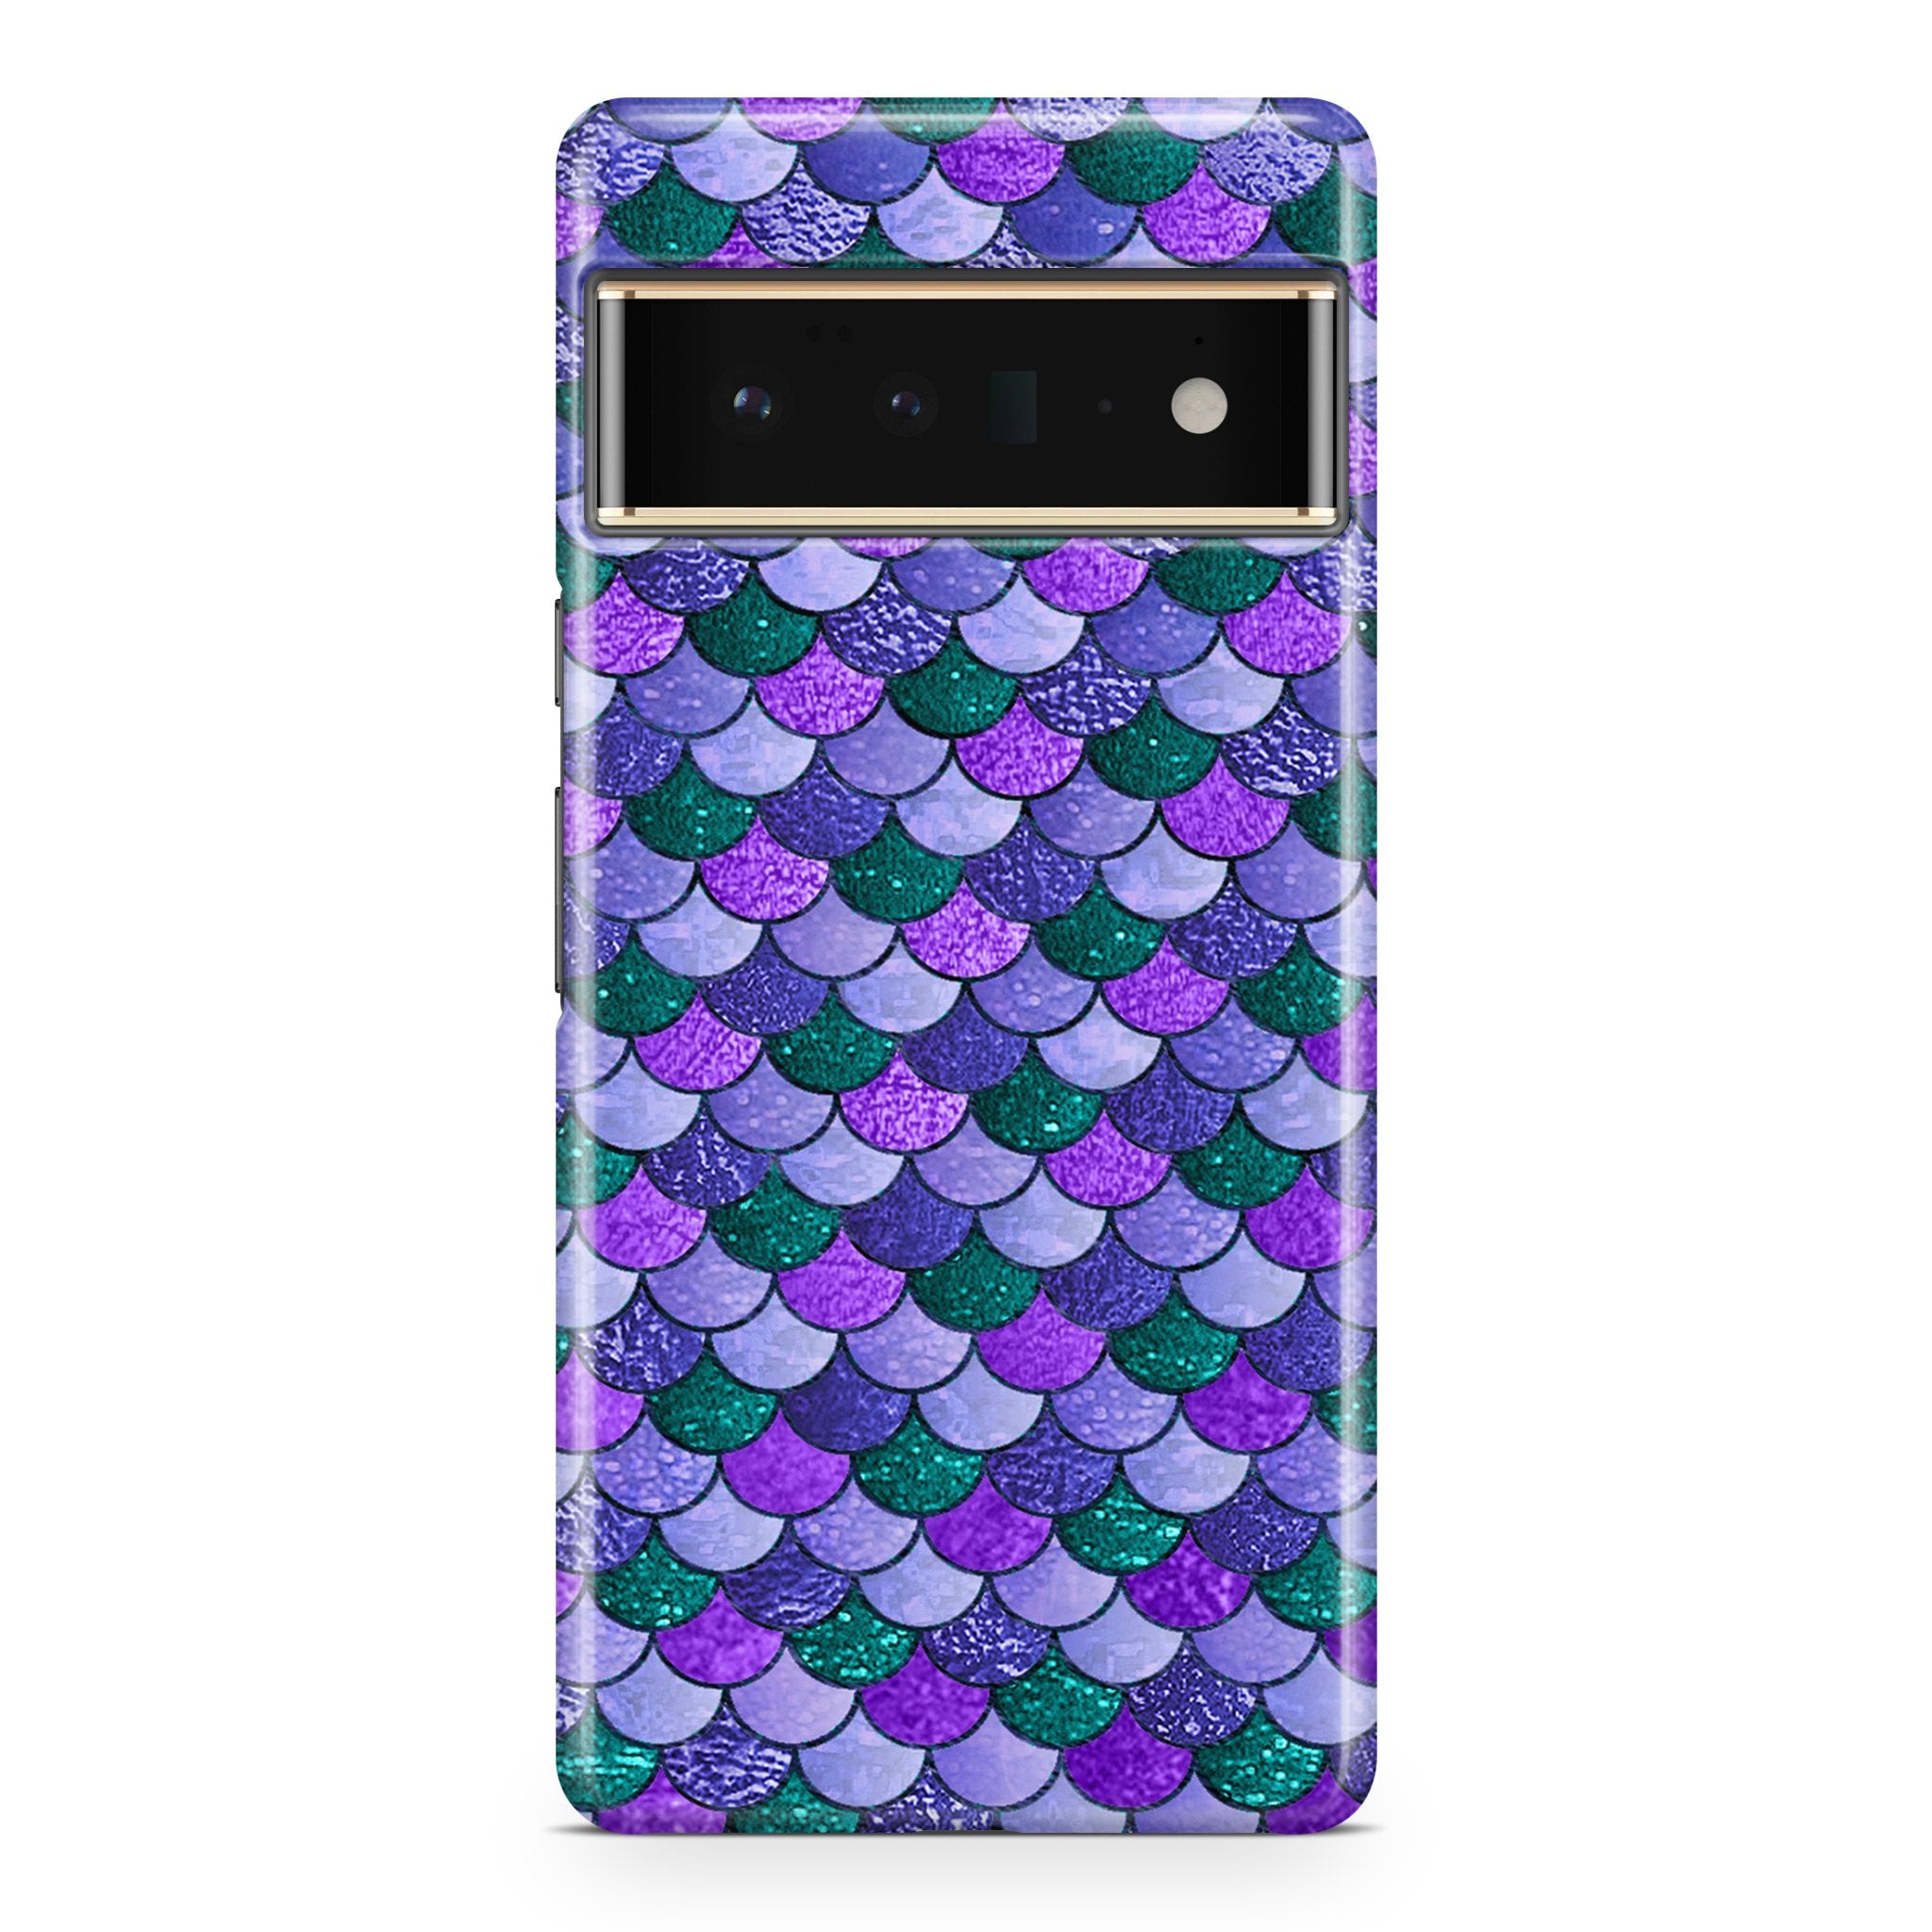 Purple Mermaid Scale - Google phone case designs by CaseSwagger